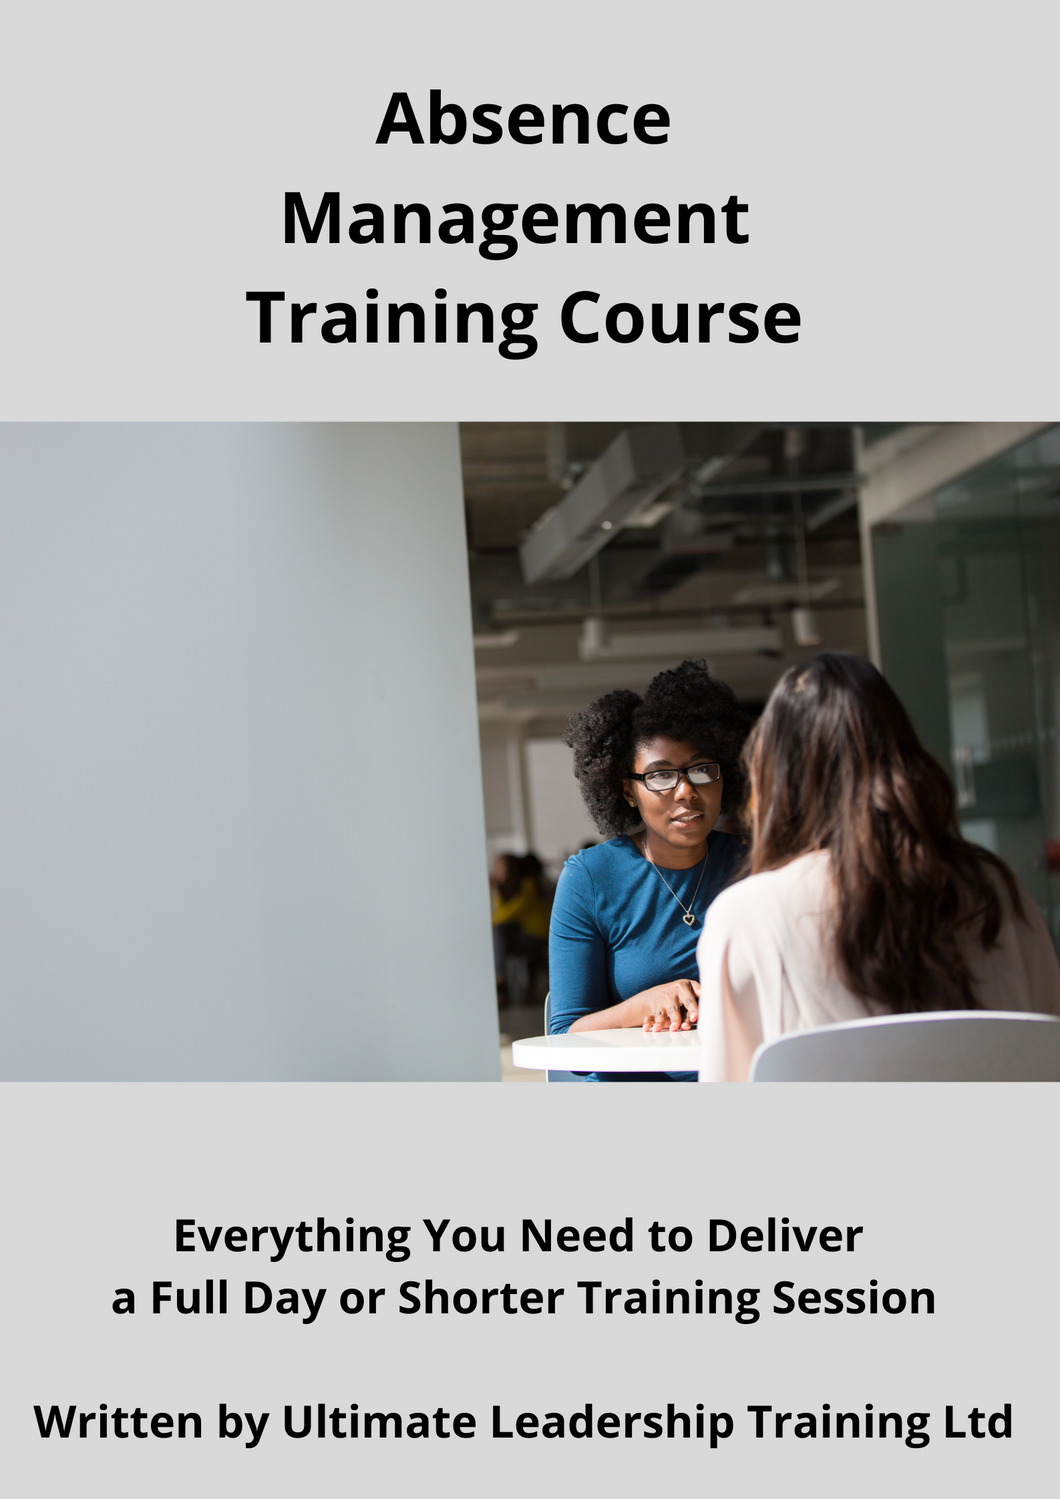 Absence Management Training Course